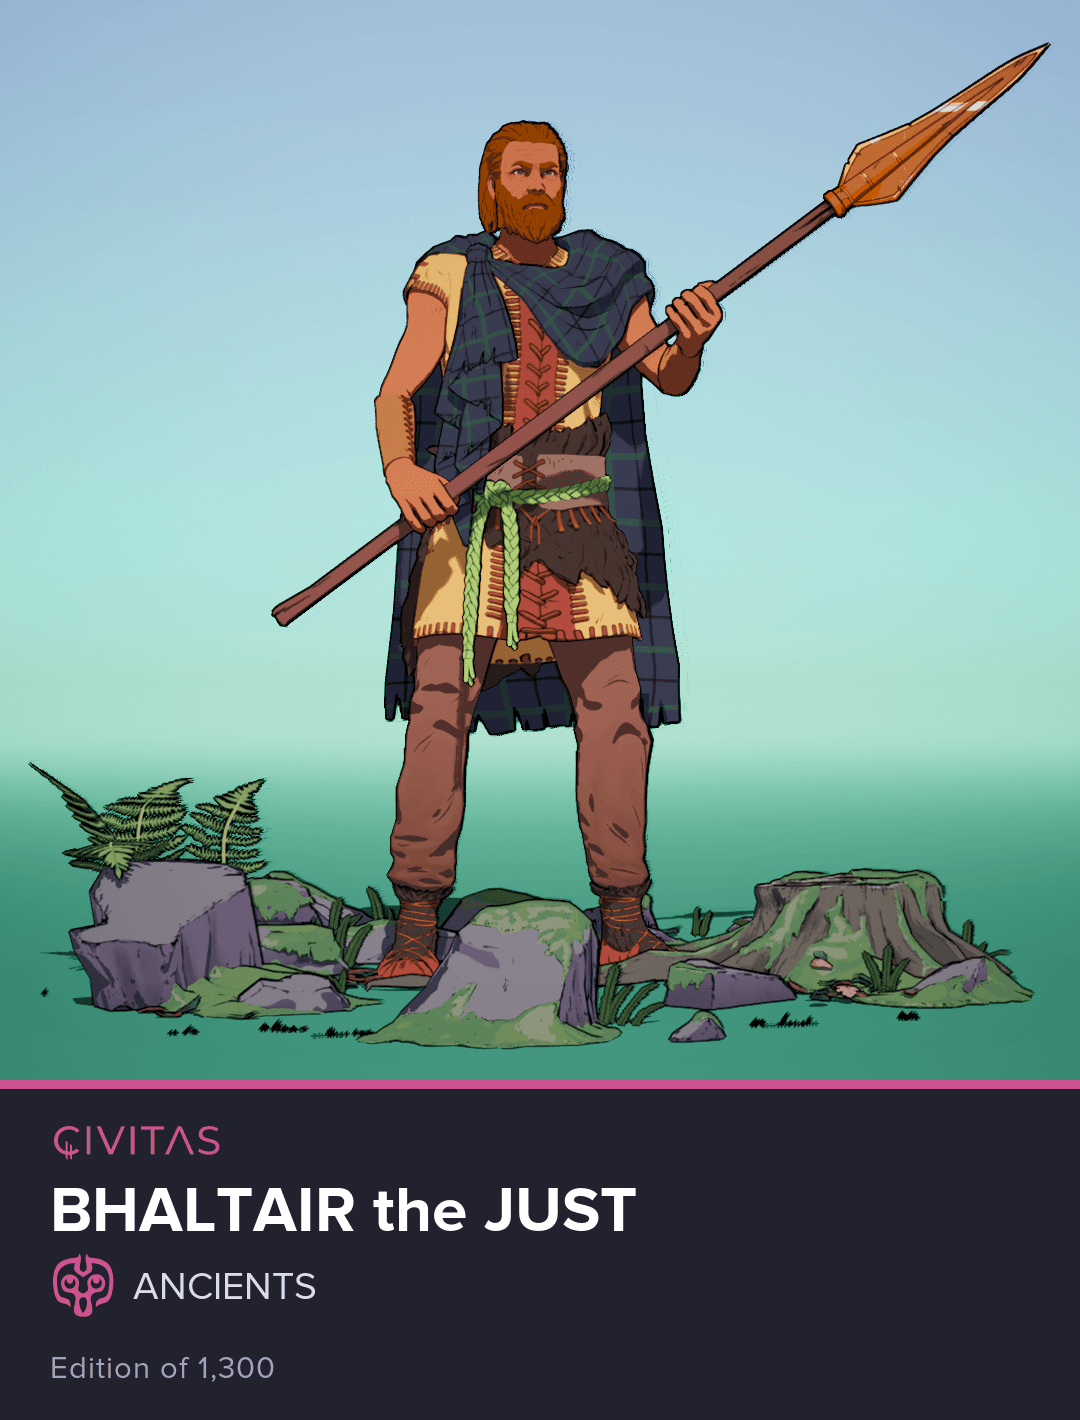 Bhaltair the Just #343